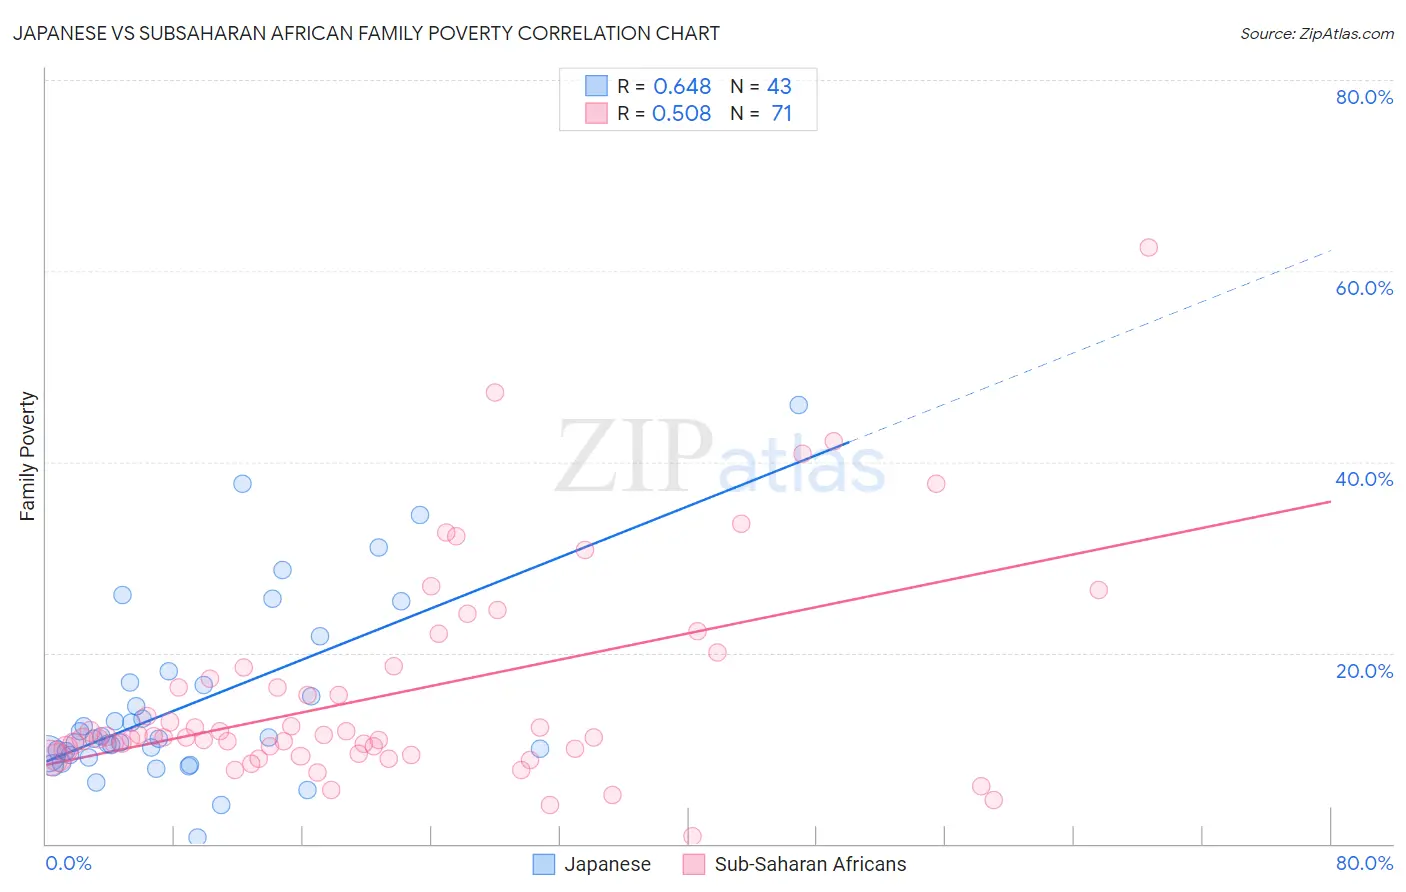 Japanese vs Subsaharan African Family Poverty